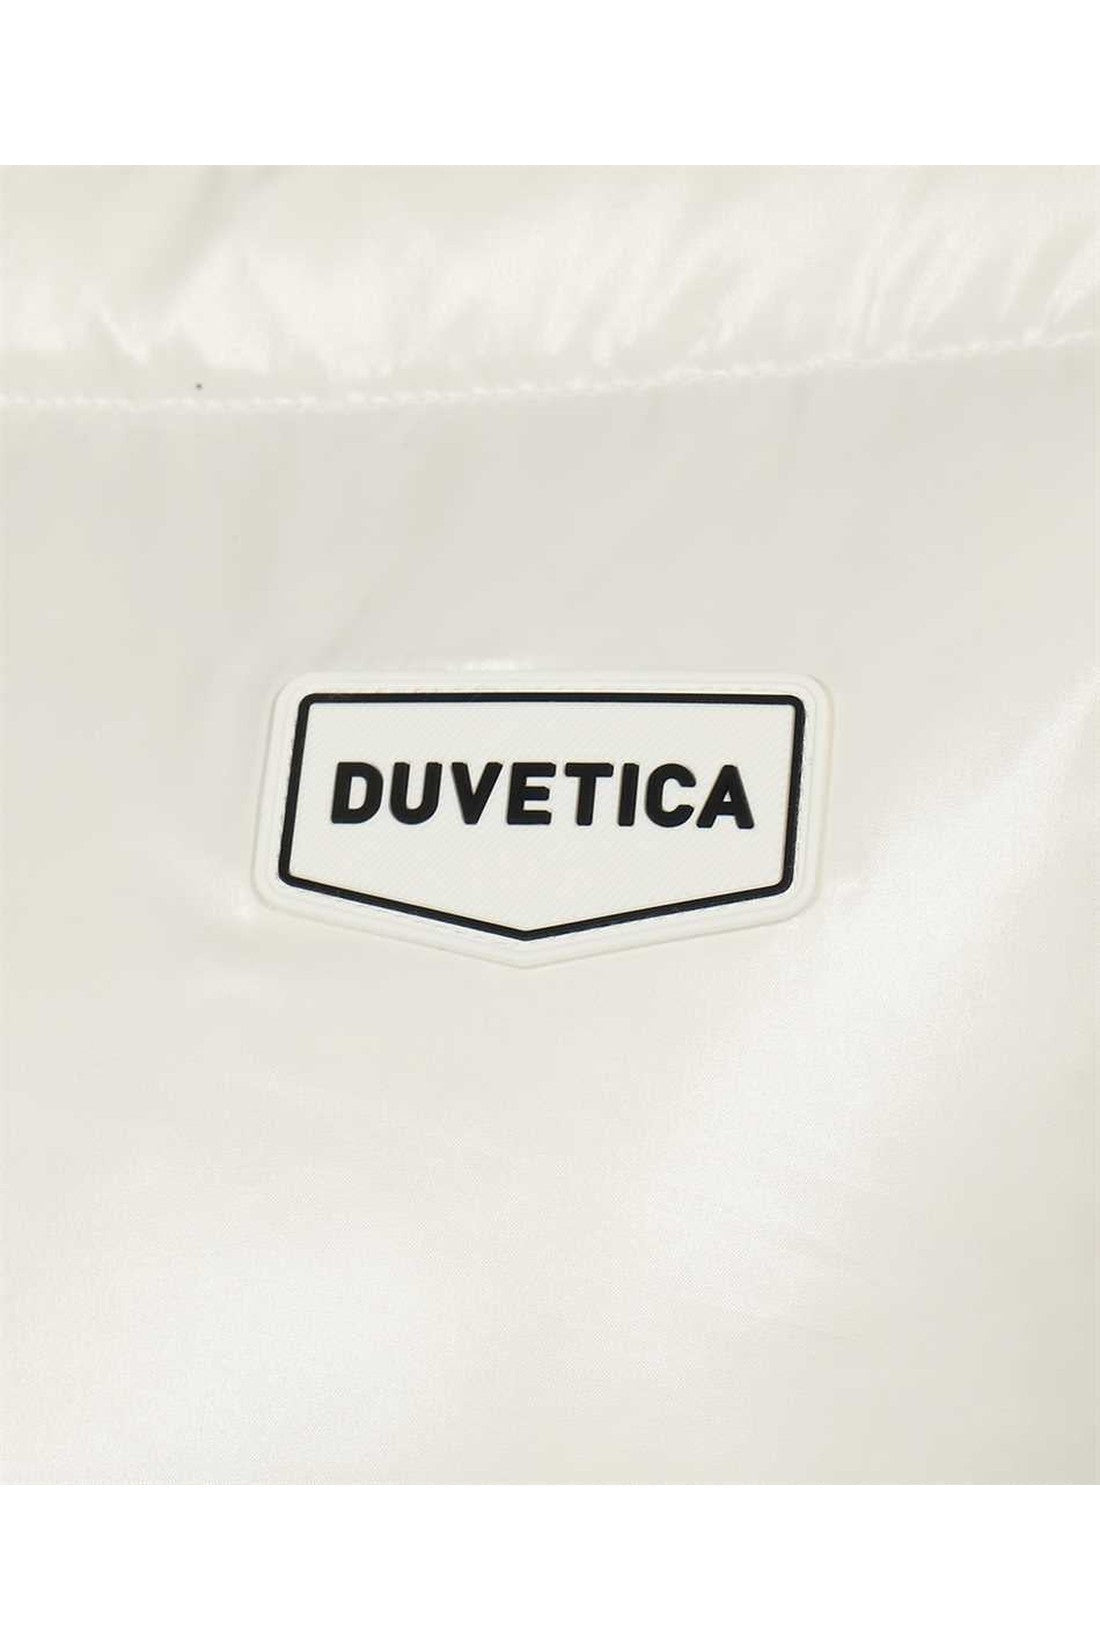 Duvetica-OUTLET-SALE-Long-hooded-down-jacket-Jacken-Mantel-ARCHIVE-COLLECTION-3.jpg